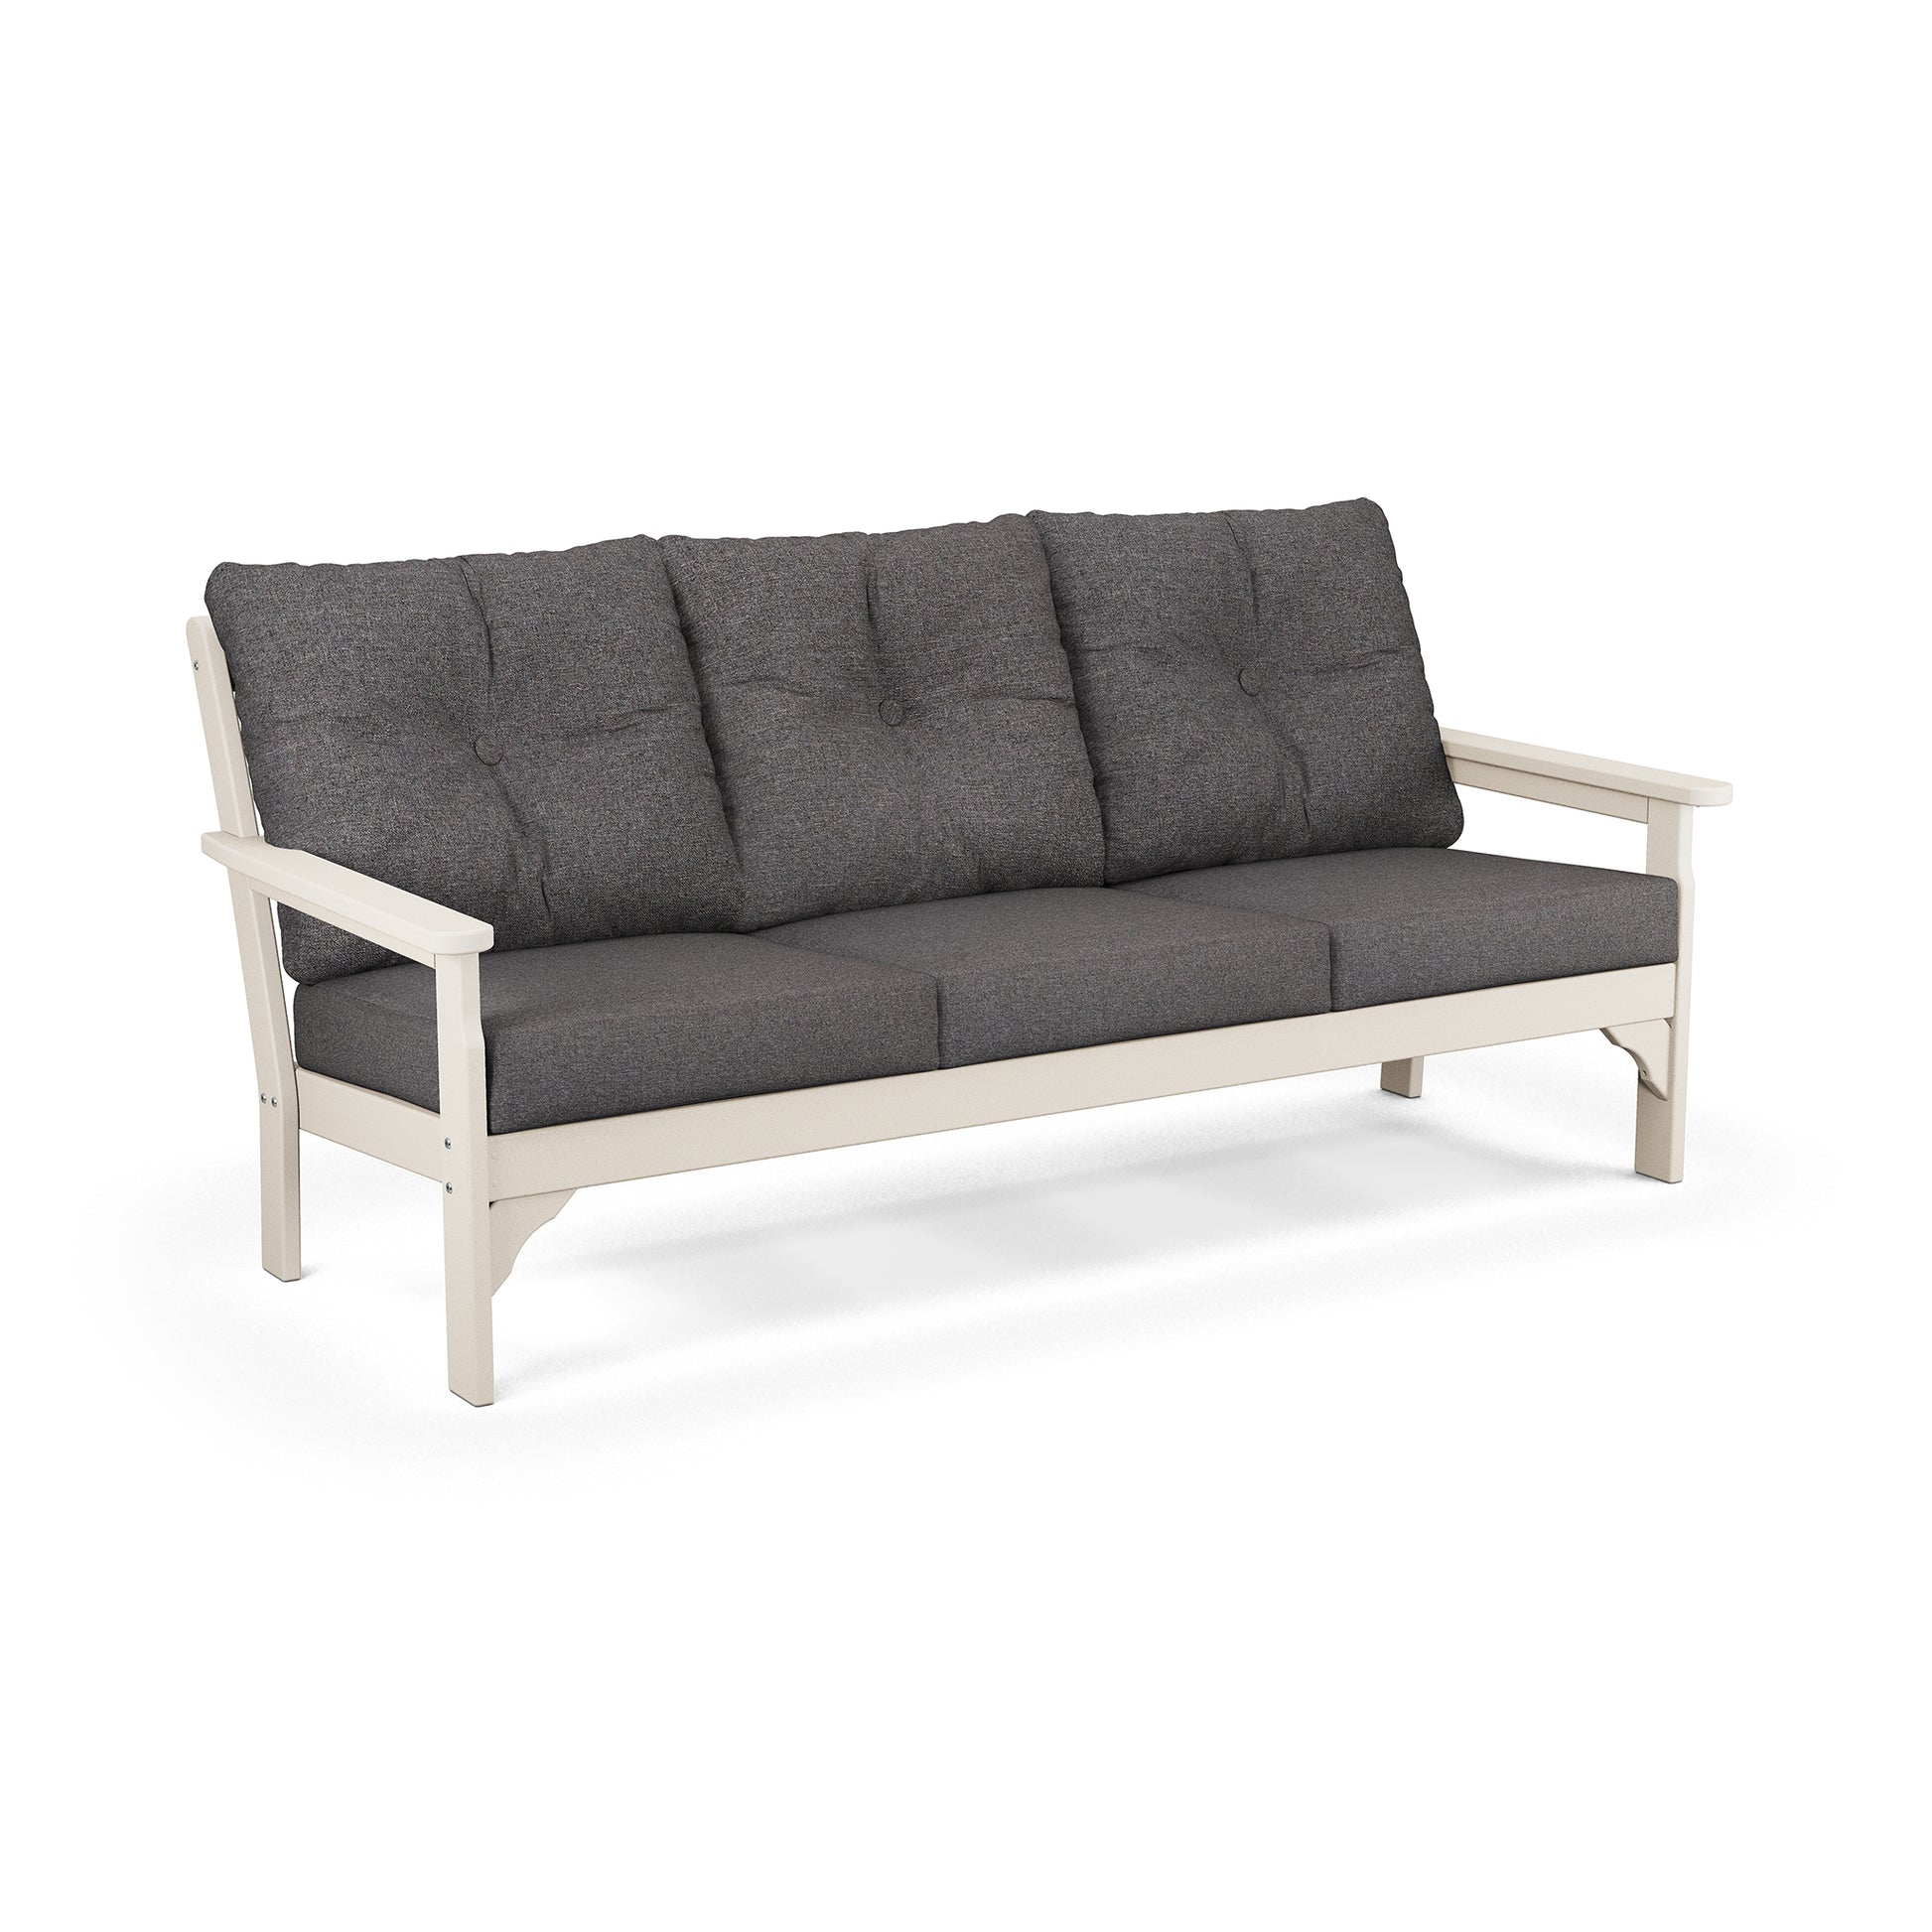 A modern three-seater POLYWOOD Vineyard Deep Seating Sofa with a white POLYWOOD® frame and tufted gray cushions, isolated on a white background.